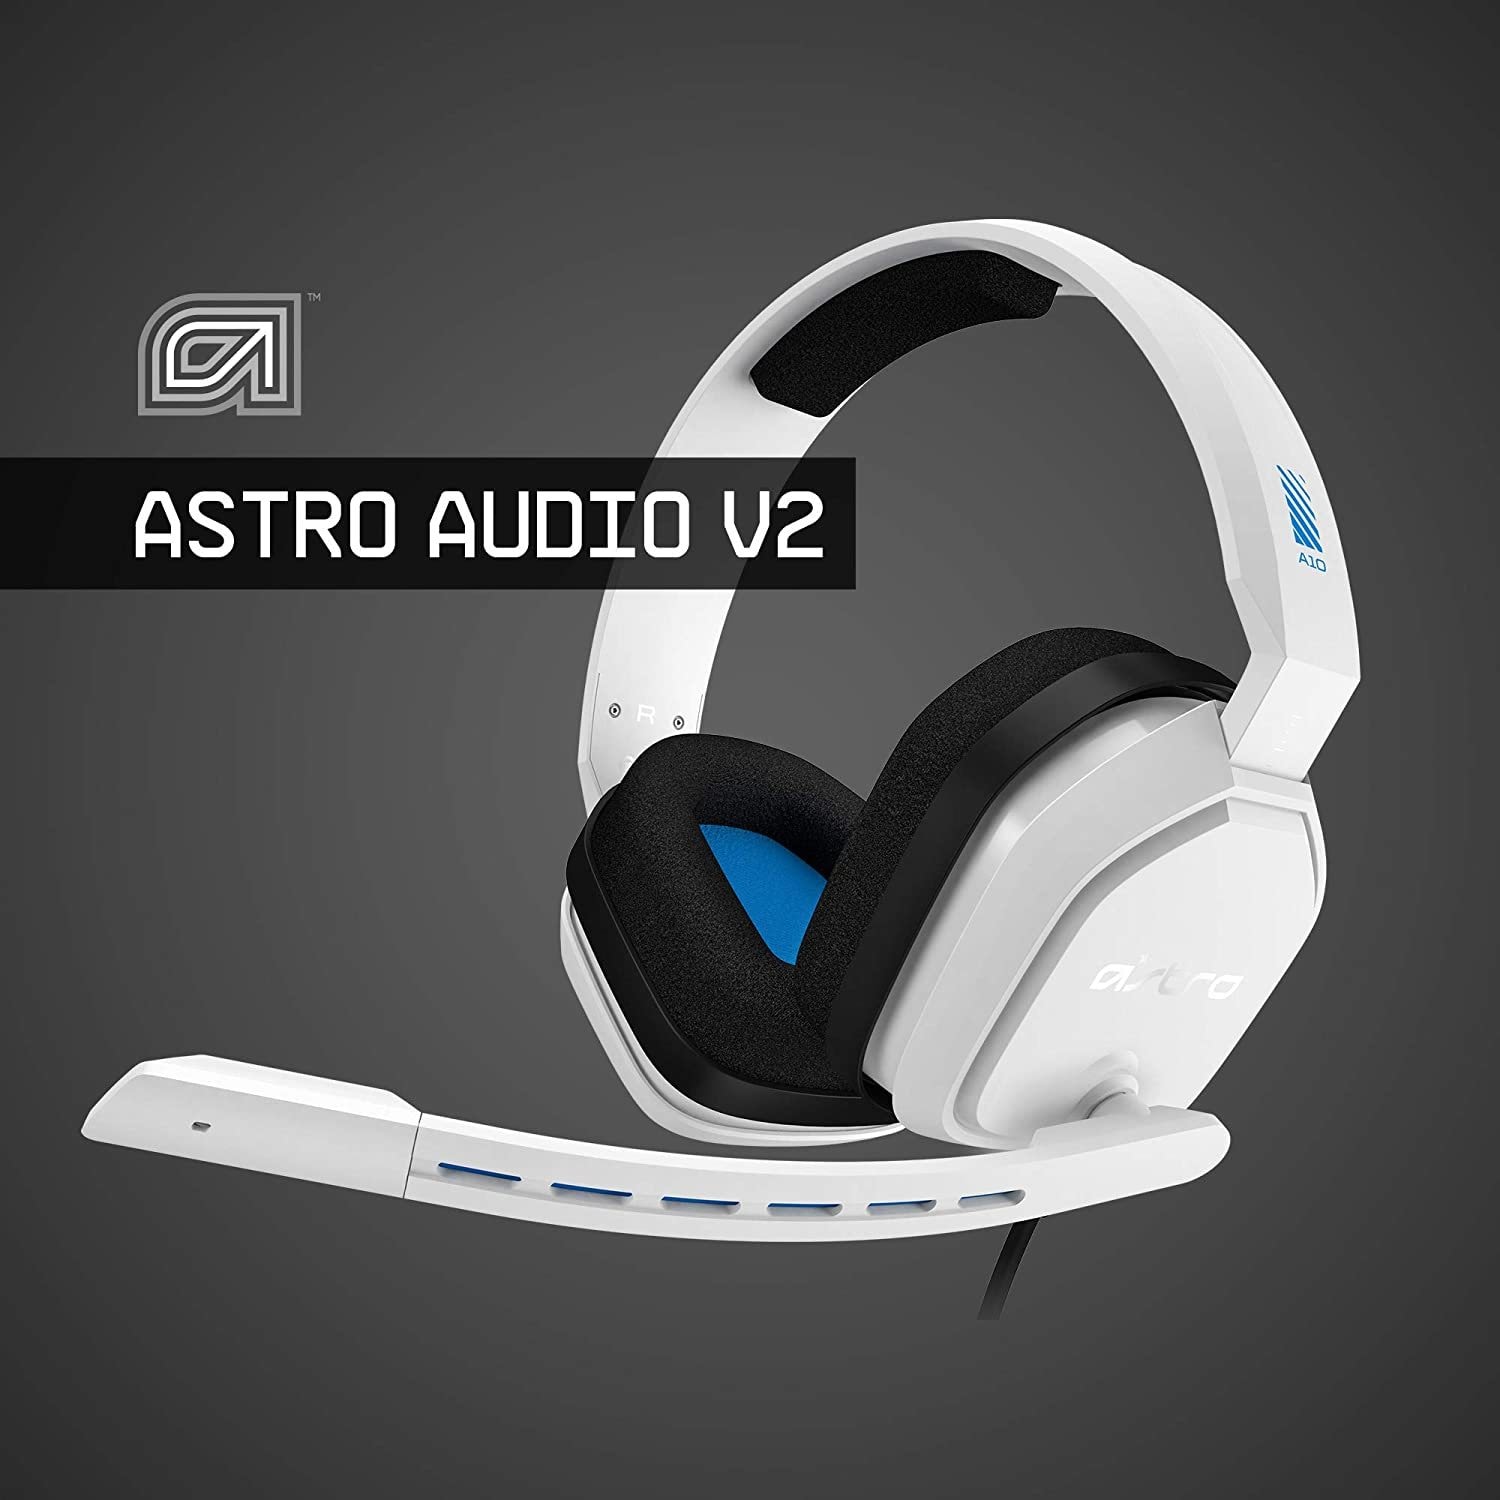 Buy Logitech Astro A10 Headset For Ps4 White Ps4 3 5mm Emea Astro A10 White Online Shop Electronics Appliances On Carrefour Uae